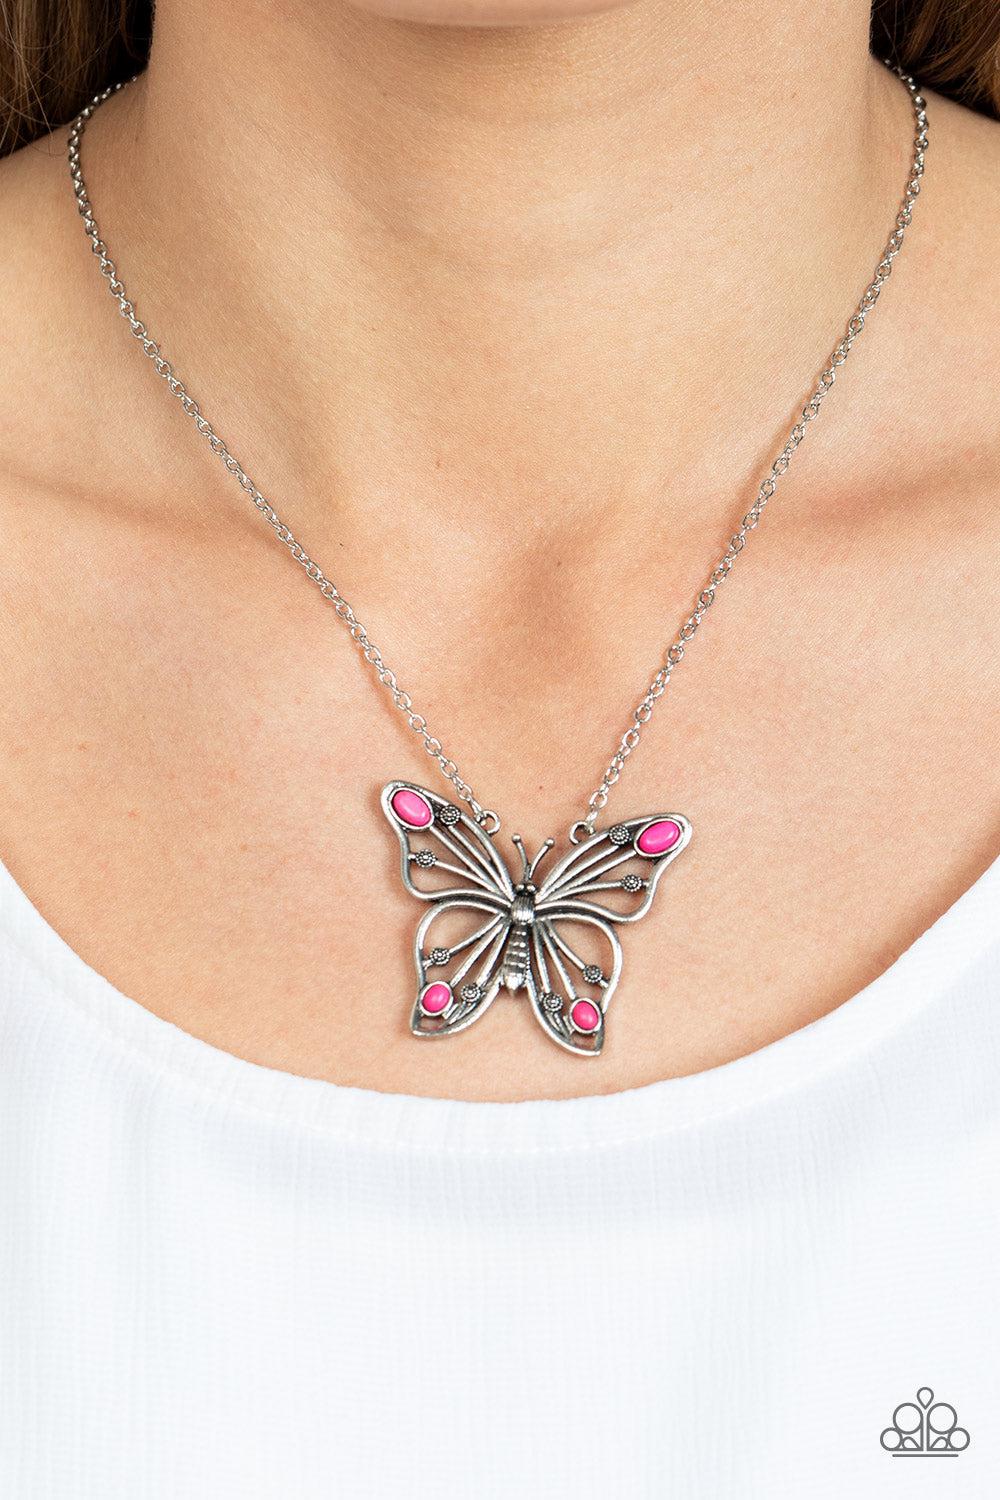 Badlands Butterfly Pink Stone Necklace - Paparazzi Accessories- lightbox - CarasShop.com - $5 Jewelry by Cara Jewels